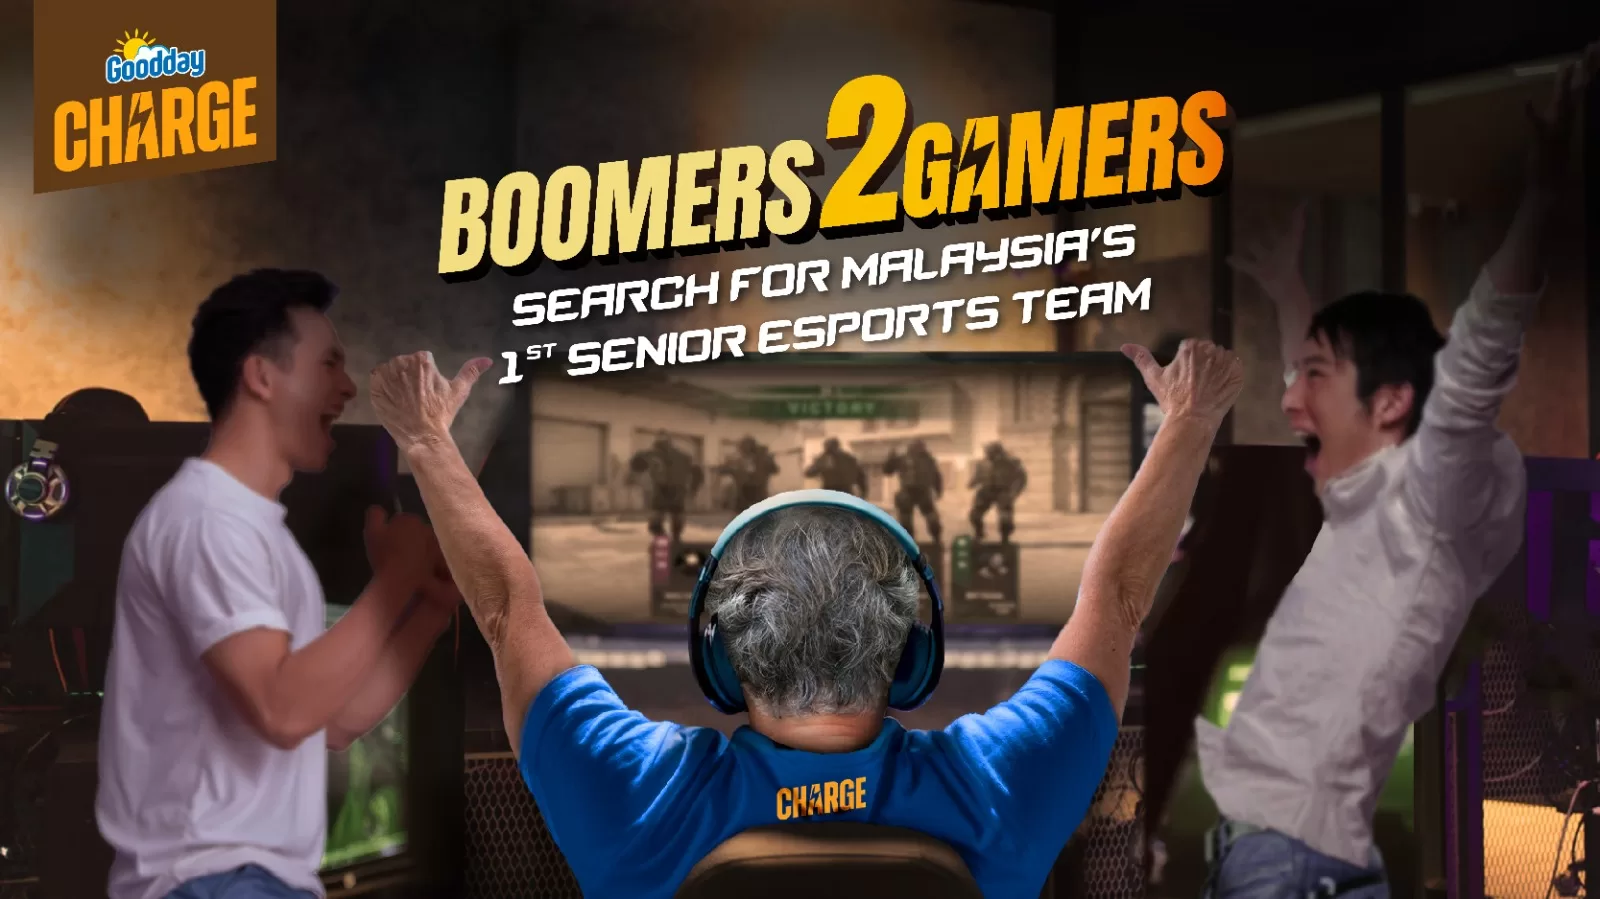 Goodday Charge Boomers2Gamers KV